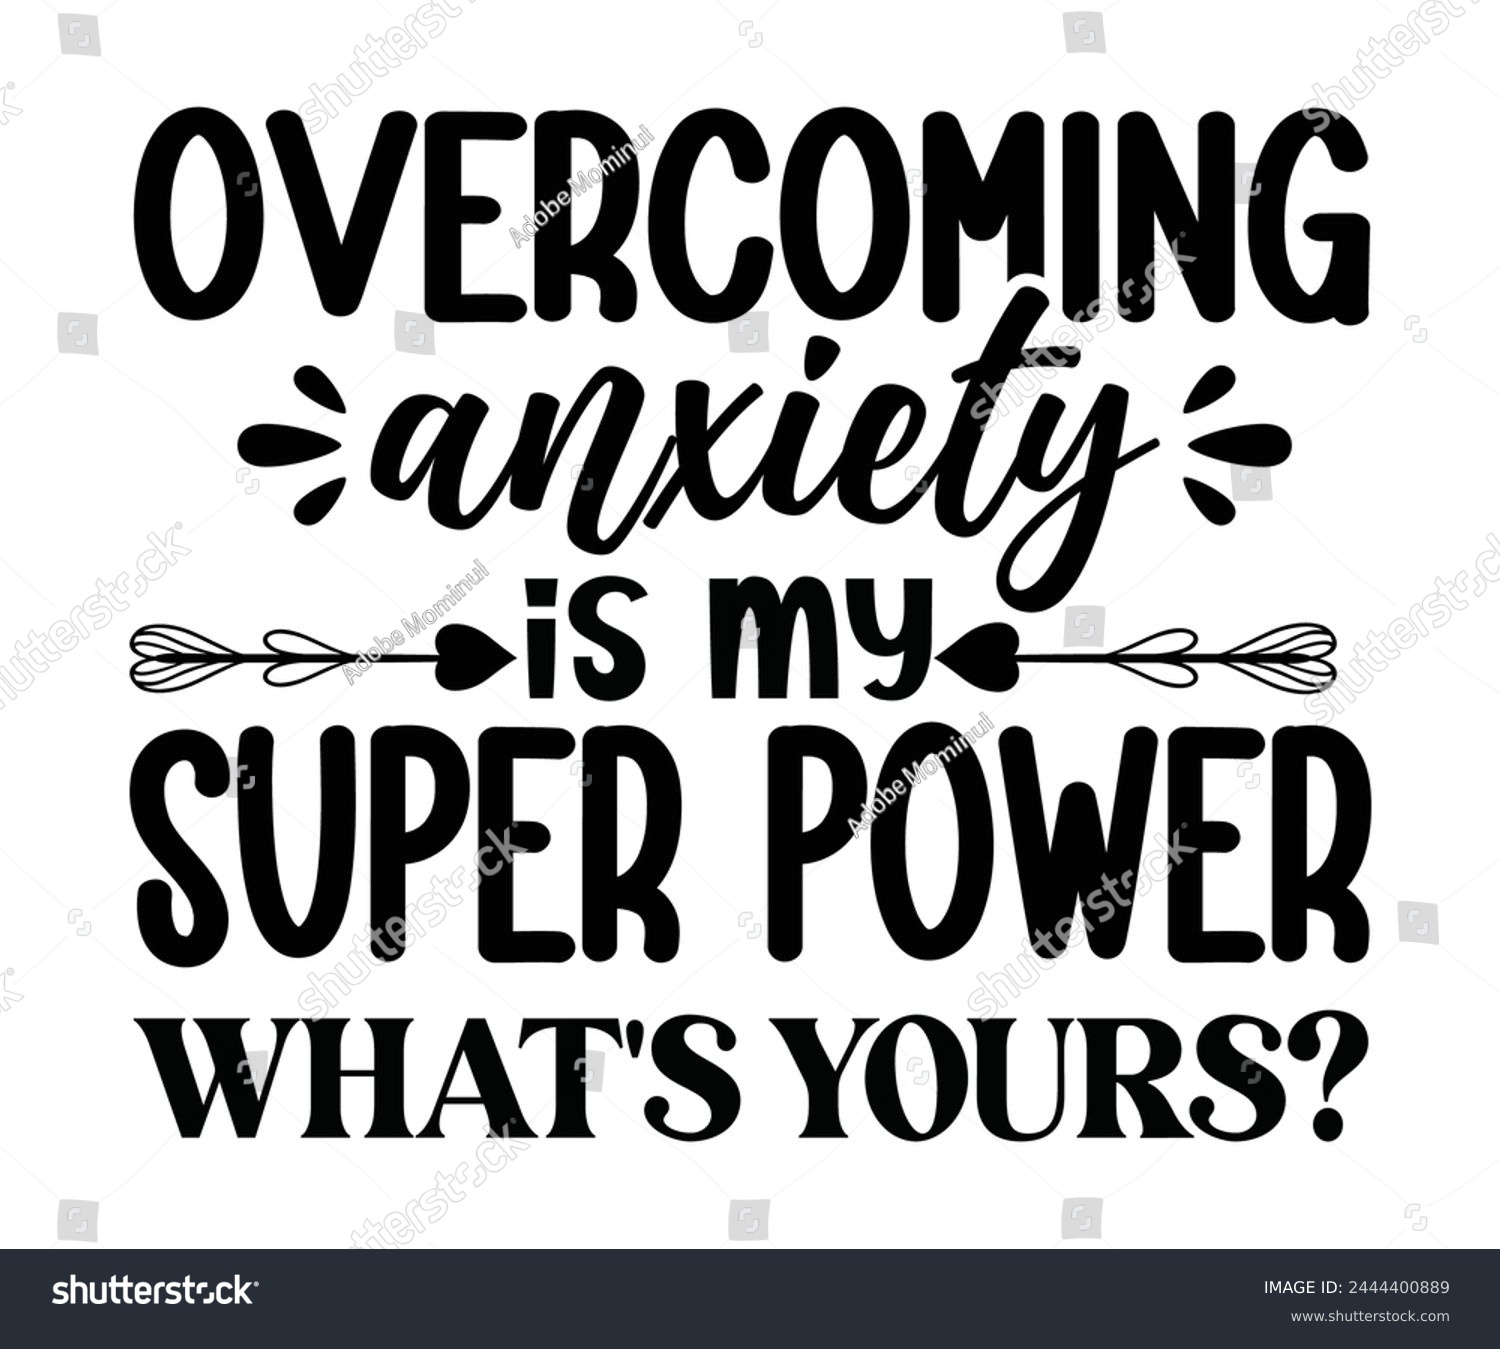 SVG of Overcoming Anxiety Is My Super power Svg,Mental Health Svg,Mental Health Awareness Svg,Anxiety Svg,Depression Svg,Funny Mental Health,Motivational Svg,Positive Svg,Cut File,Commercial Use svg